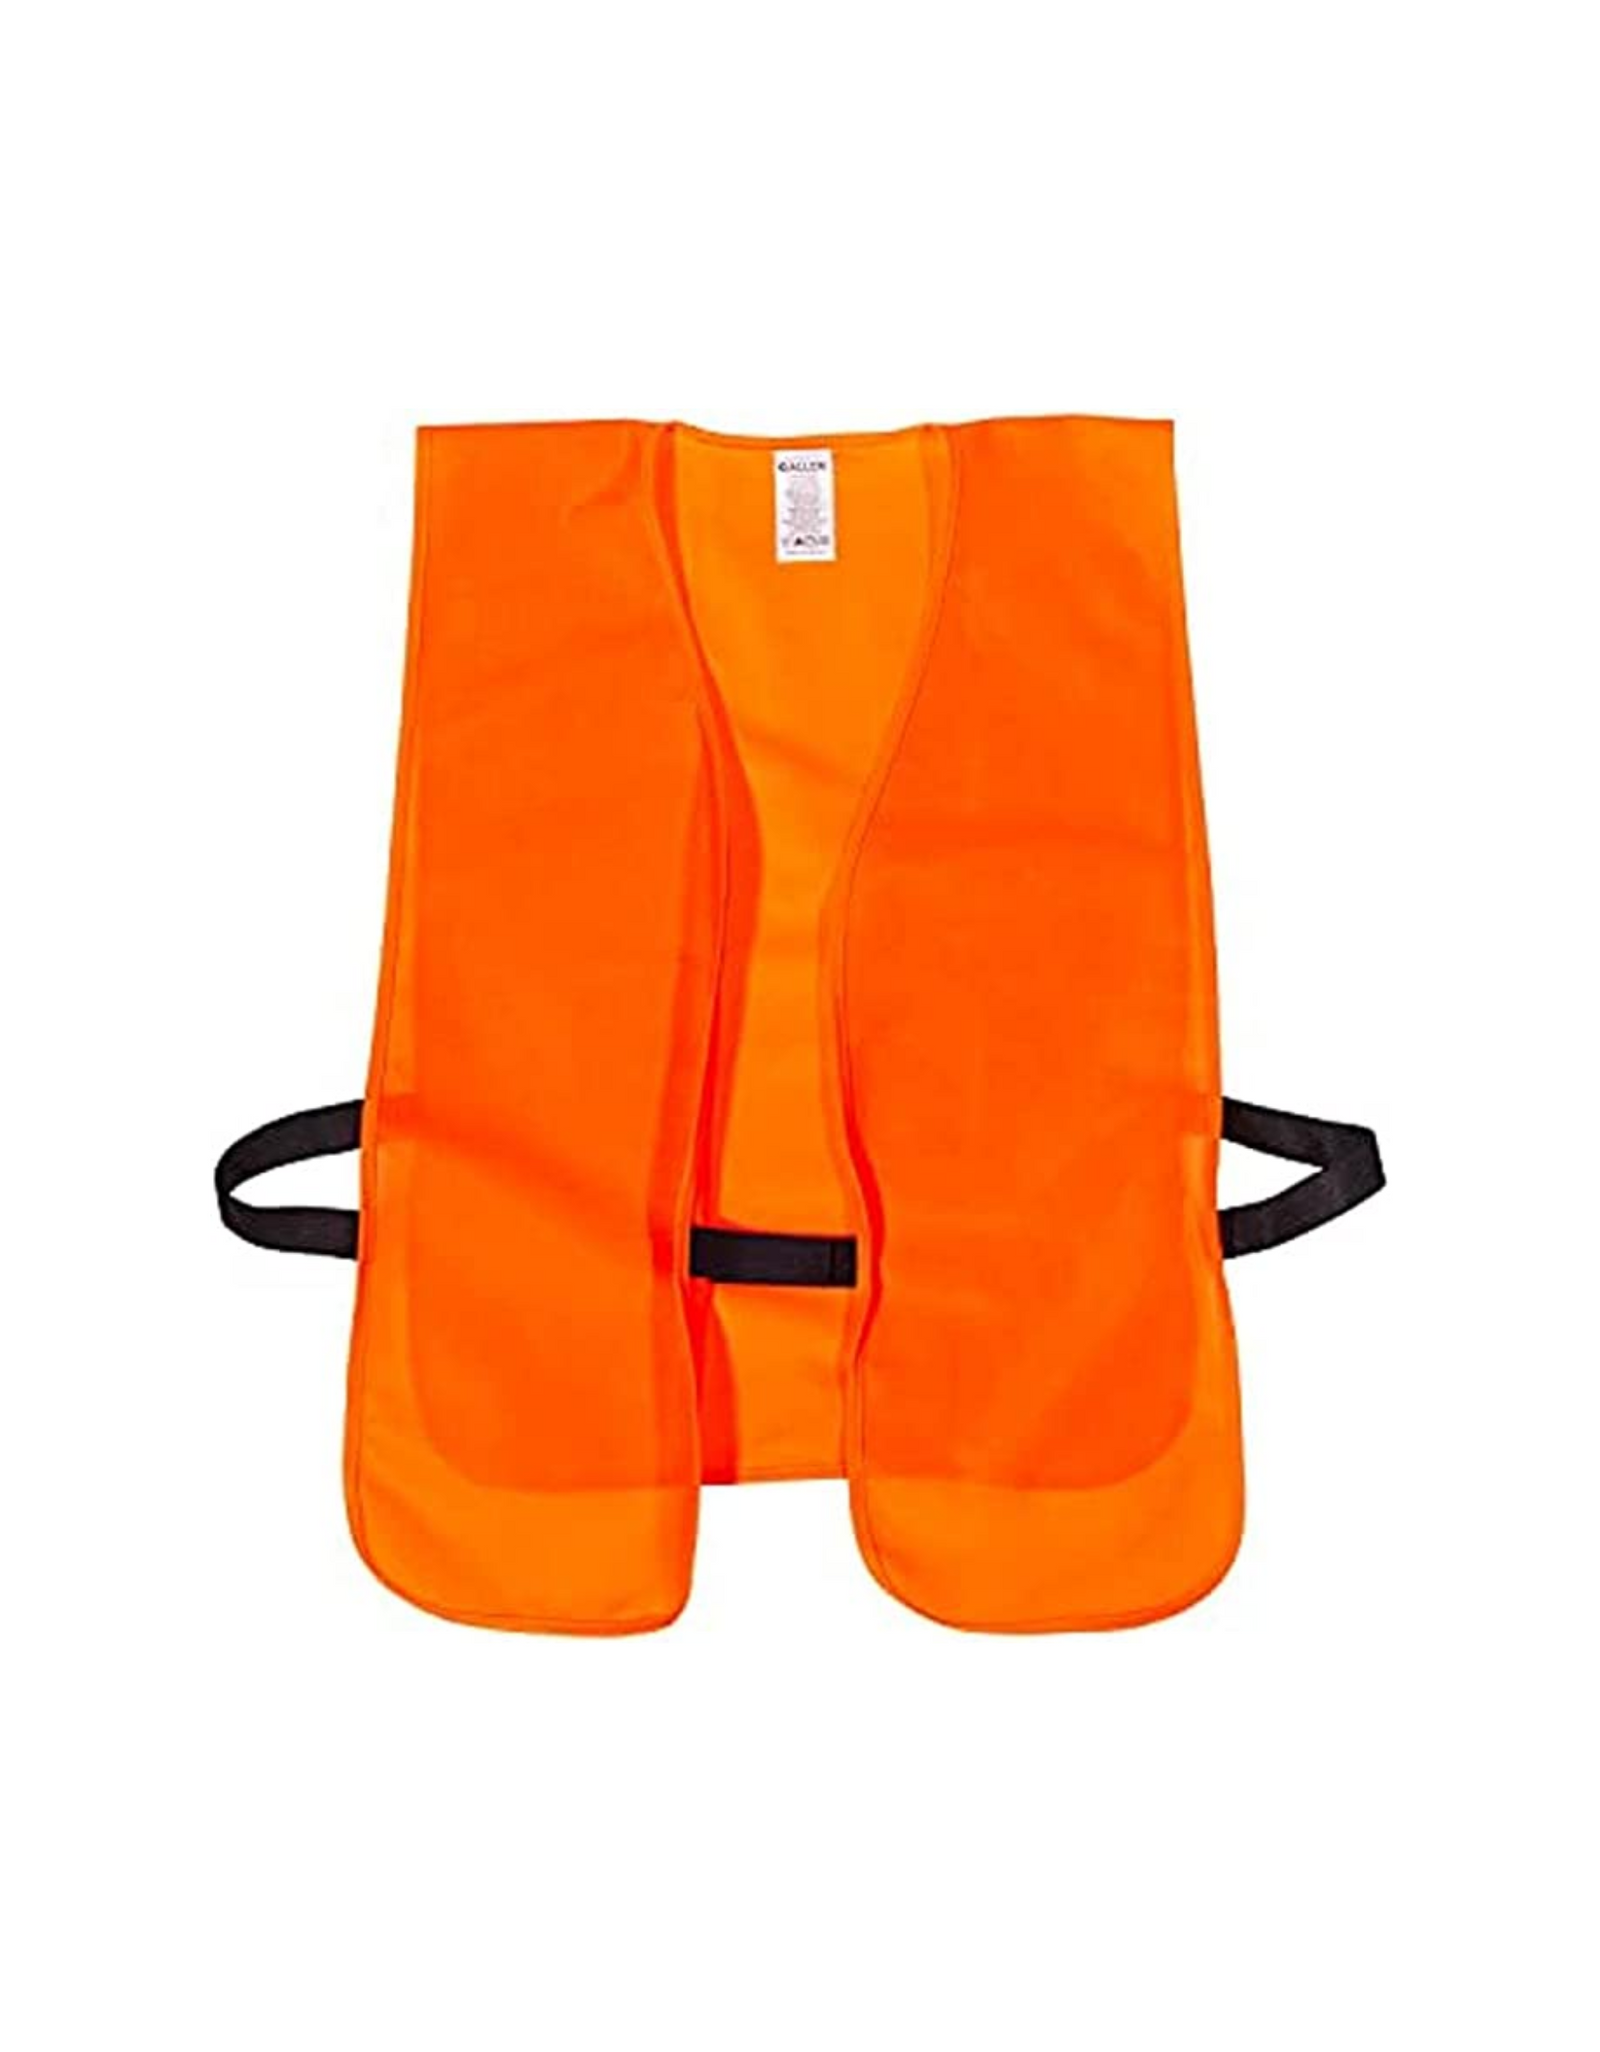 Allen Company Adult Unisex Safety & Hunting Vest, Small, Orange